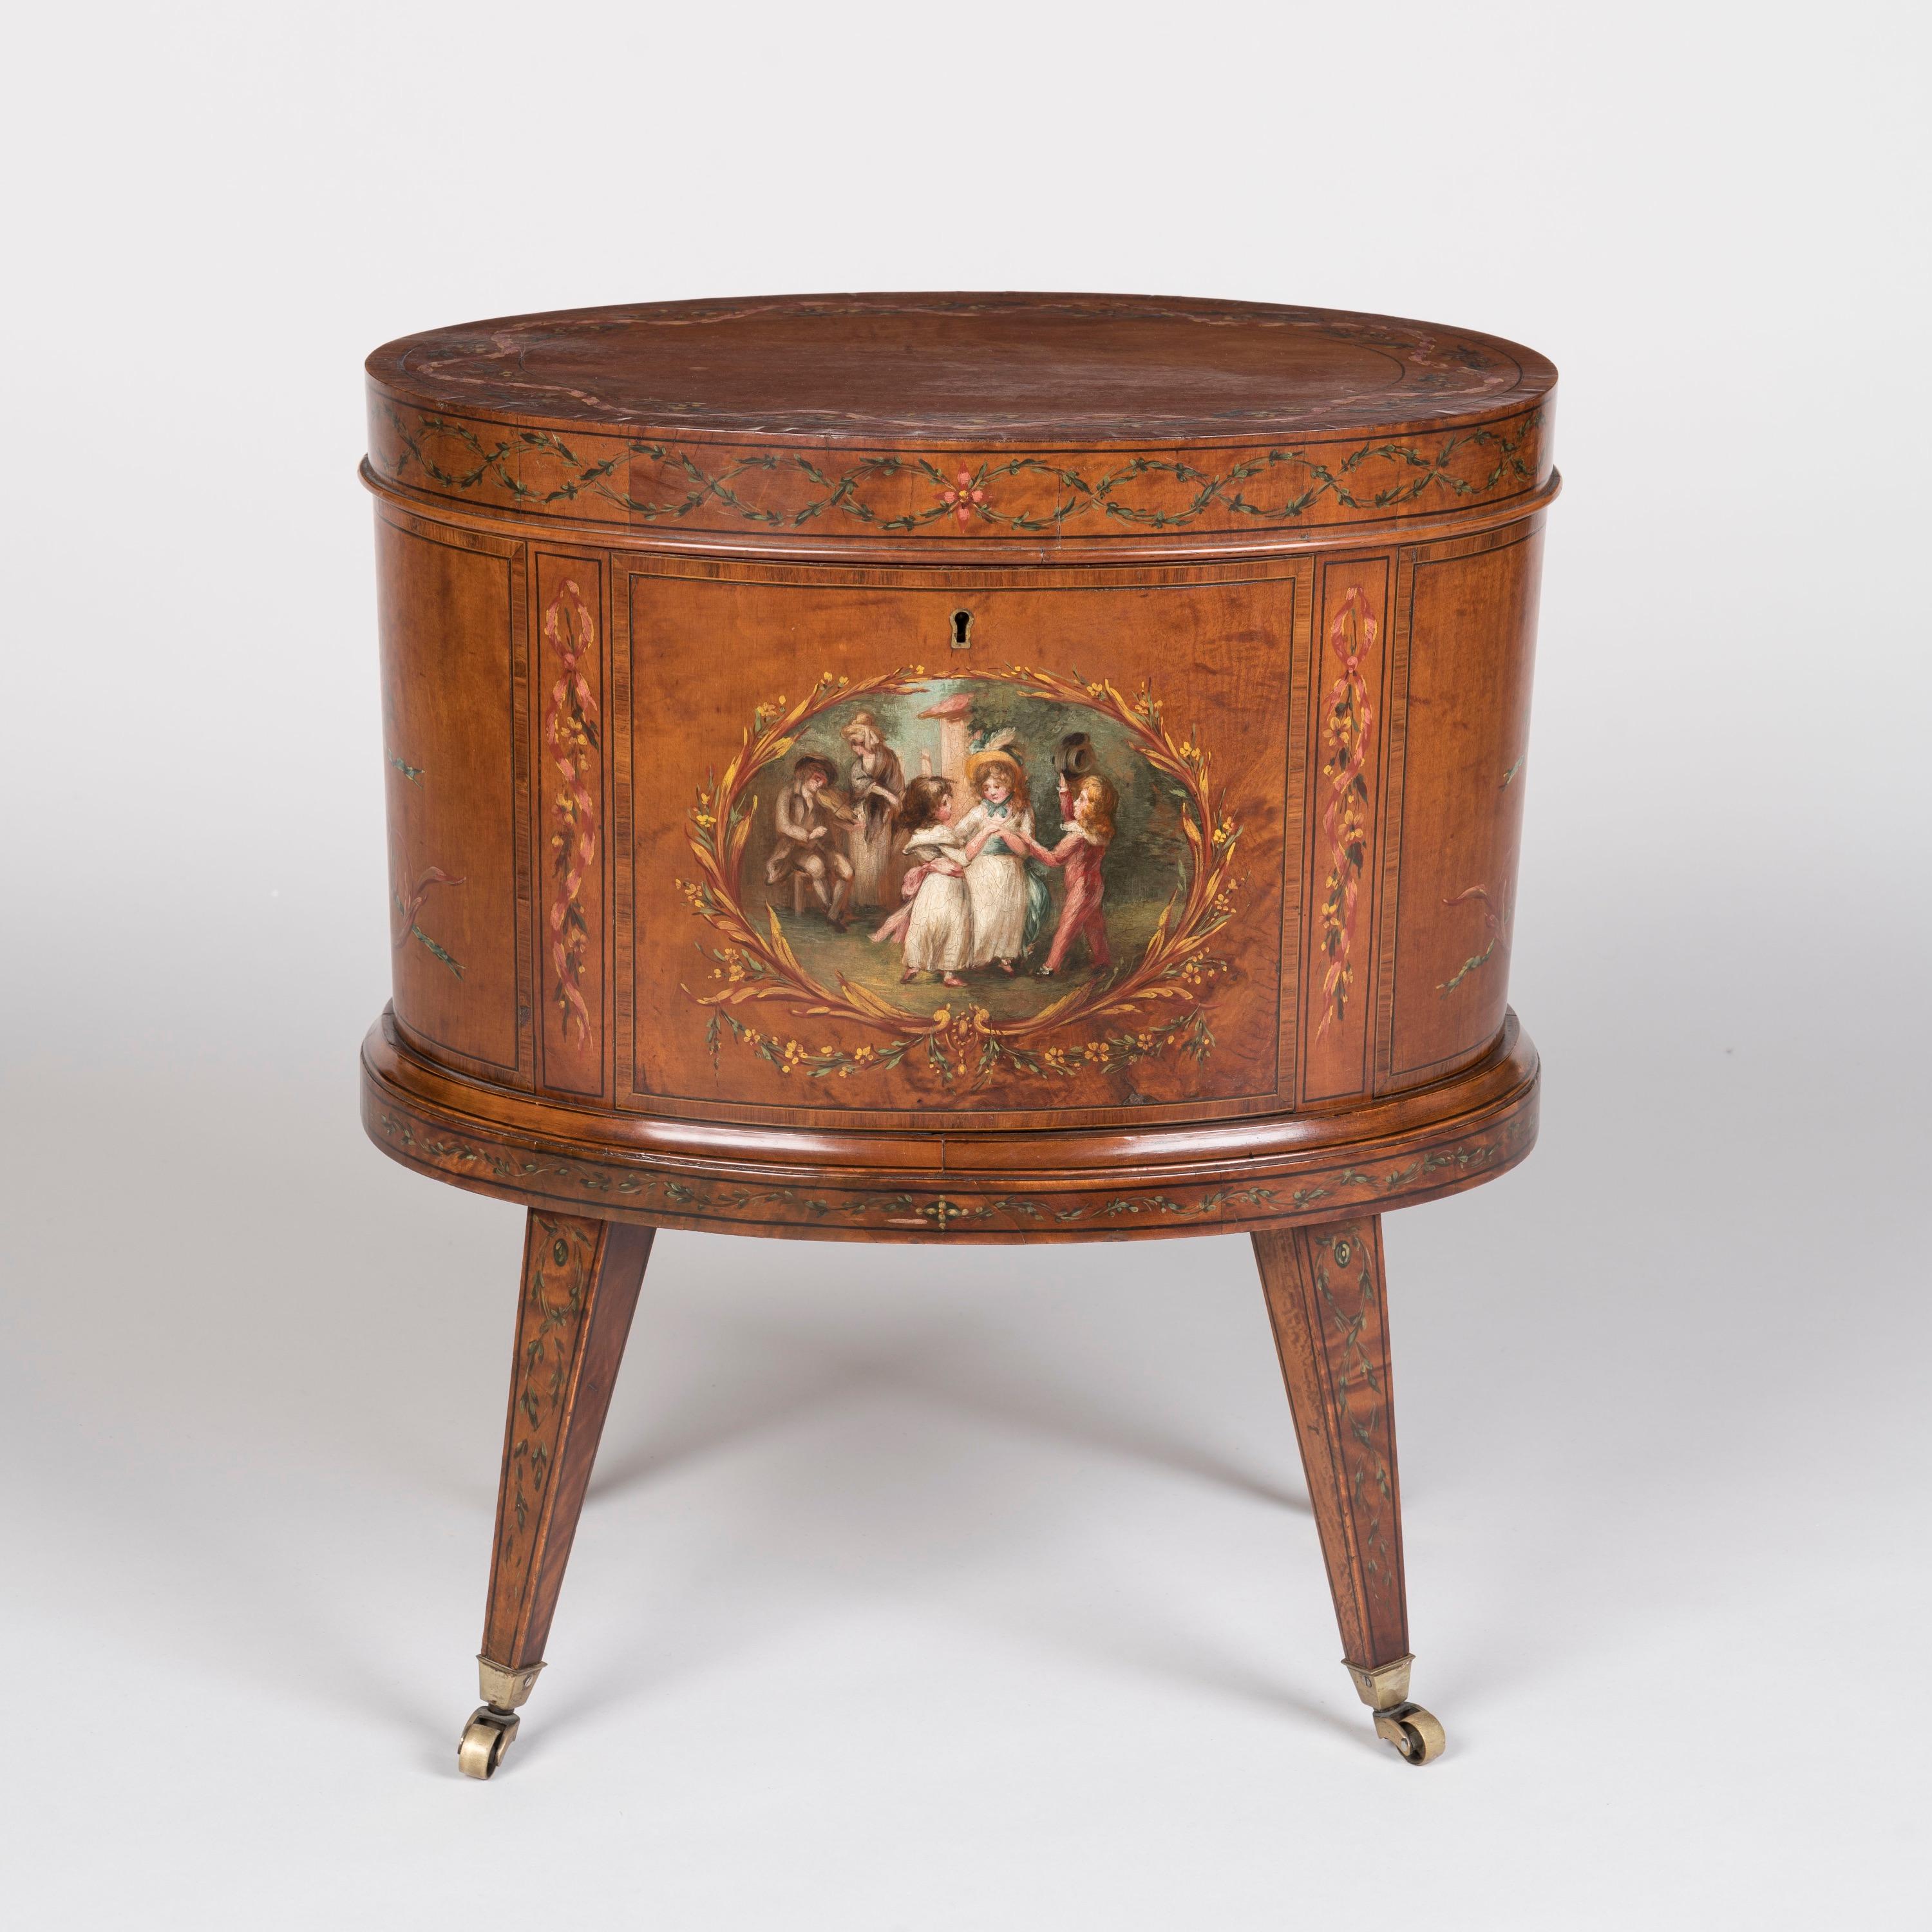 Neoclassical Revival Rare Pair of 19th Century Neoclassical Hand-Painted Satinwood Wine Coolers For Sale